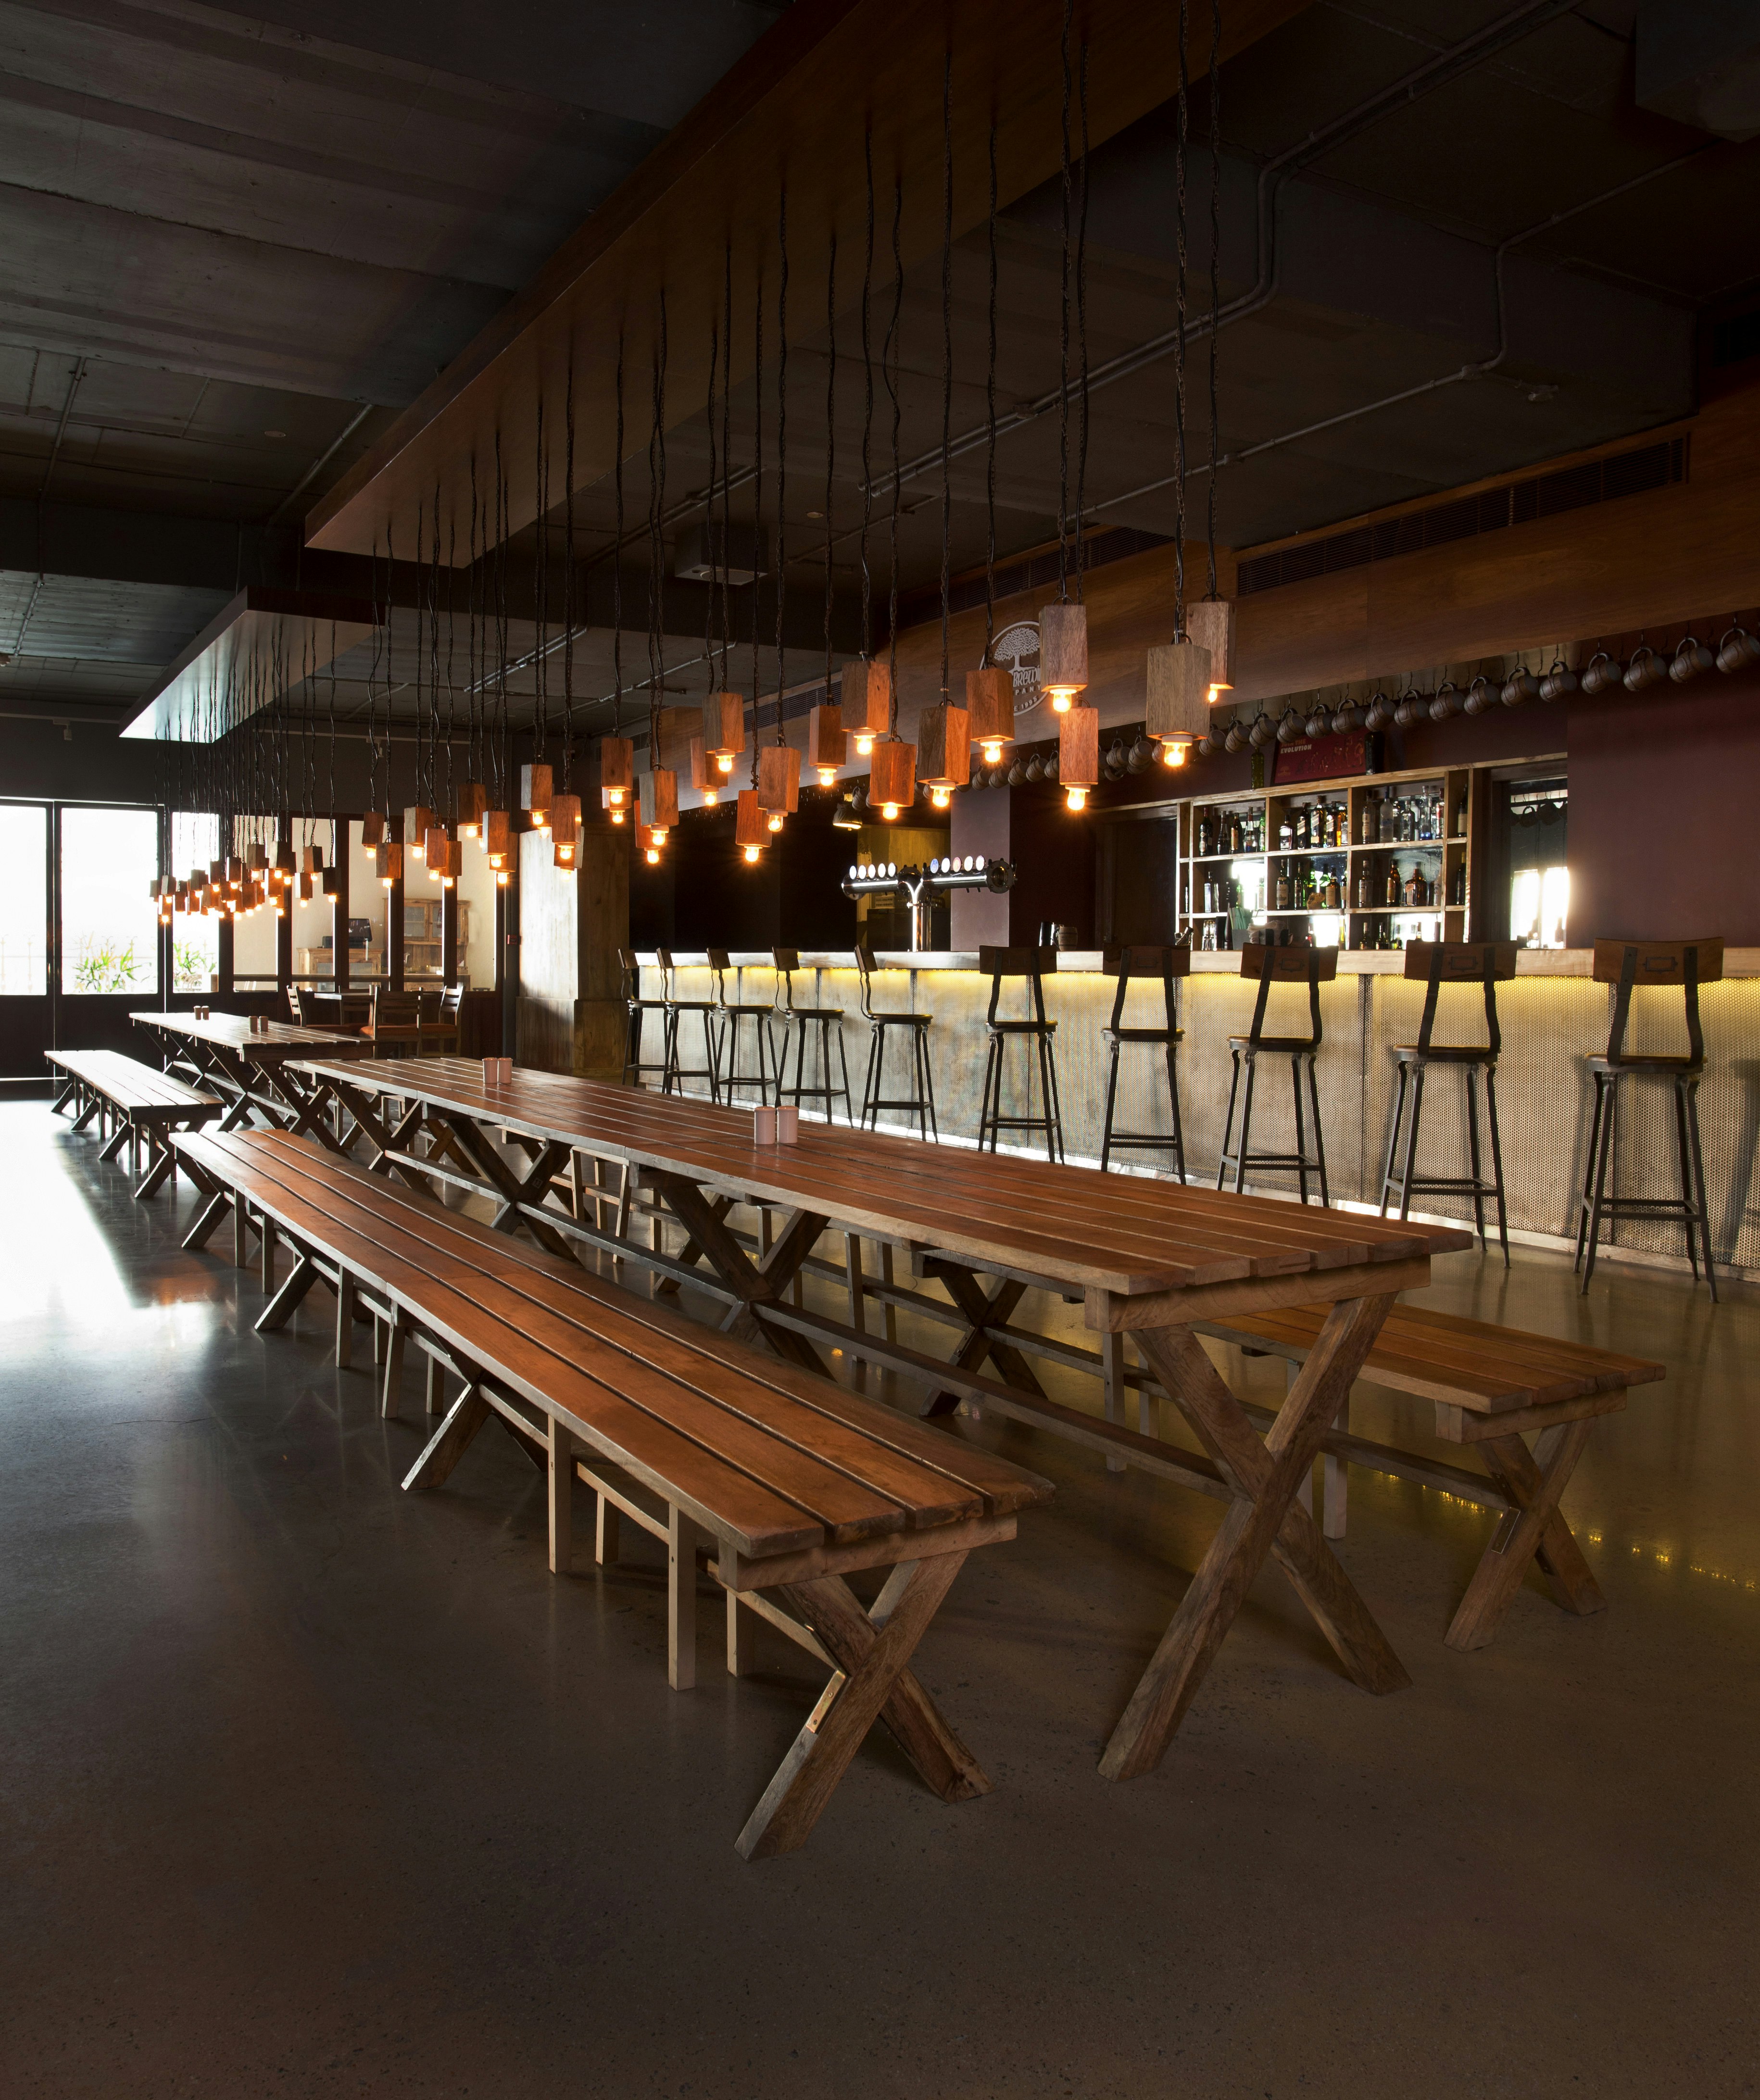 Long tables under the lights at Arbour Brewing Company